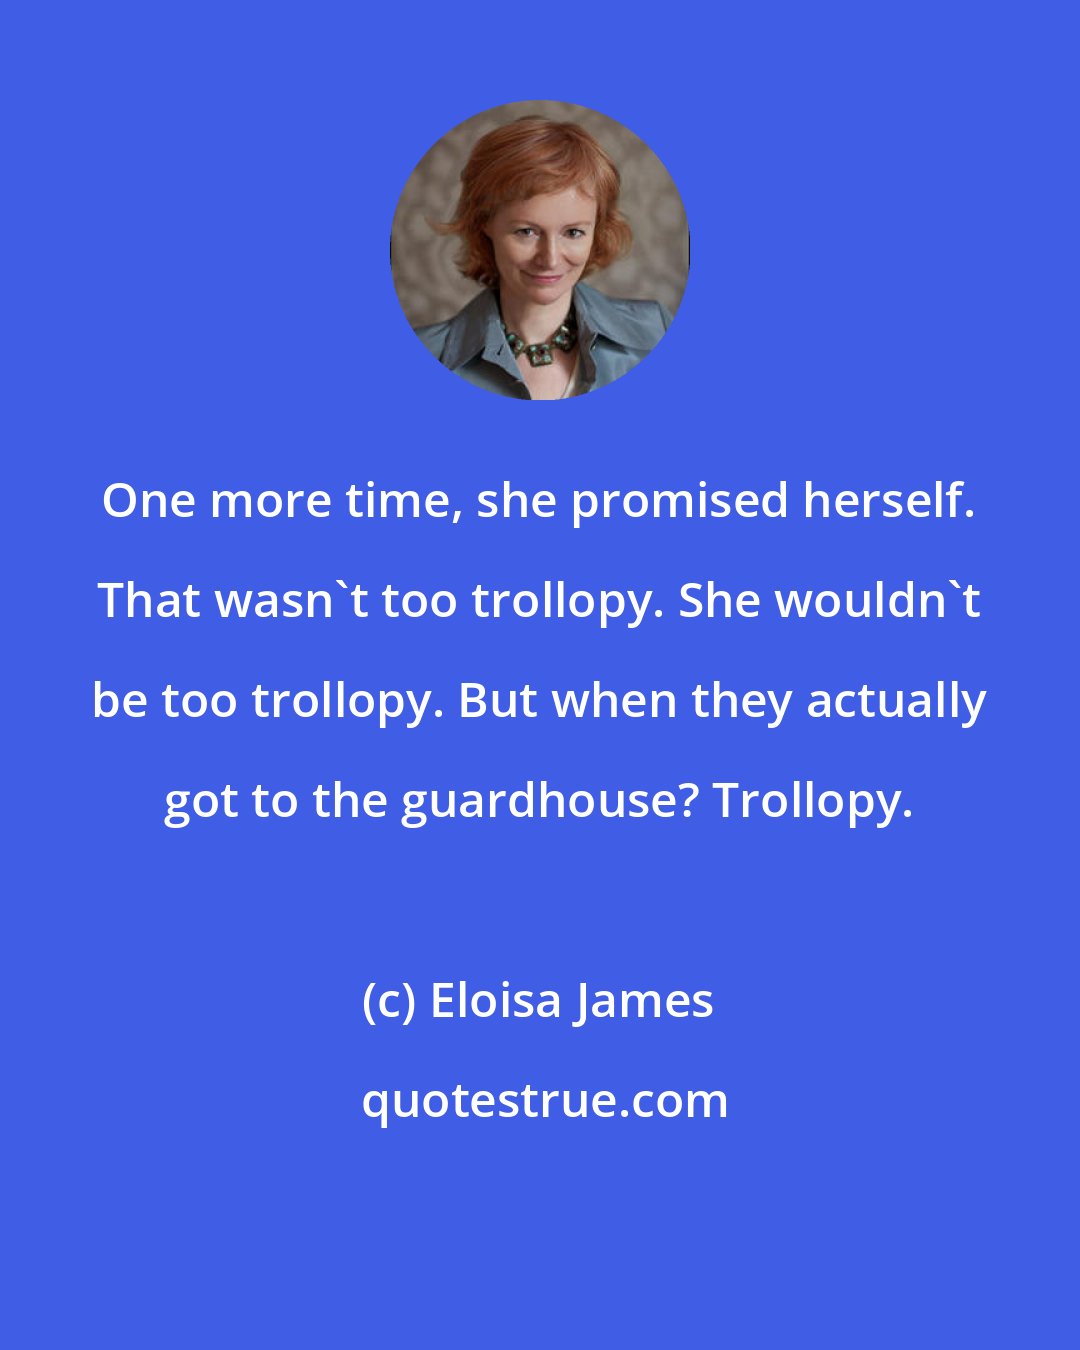 Eloisa James: One more time, she promised herself. That wasn't too trollopy. She wouldn't be too trollopy. But when they actually got to the guardhouse? Trollopy.